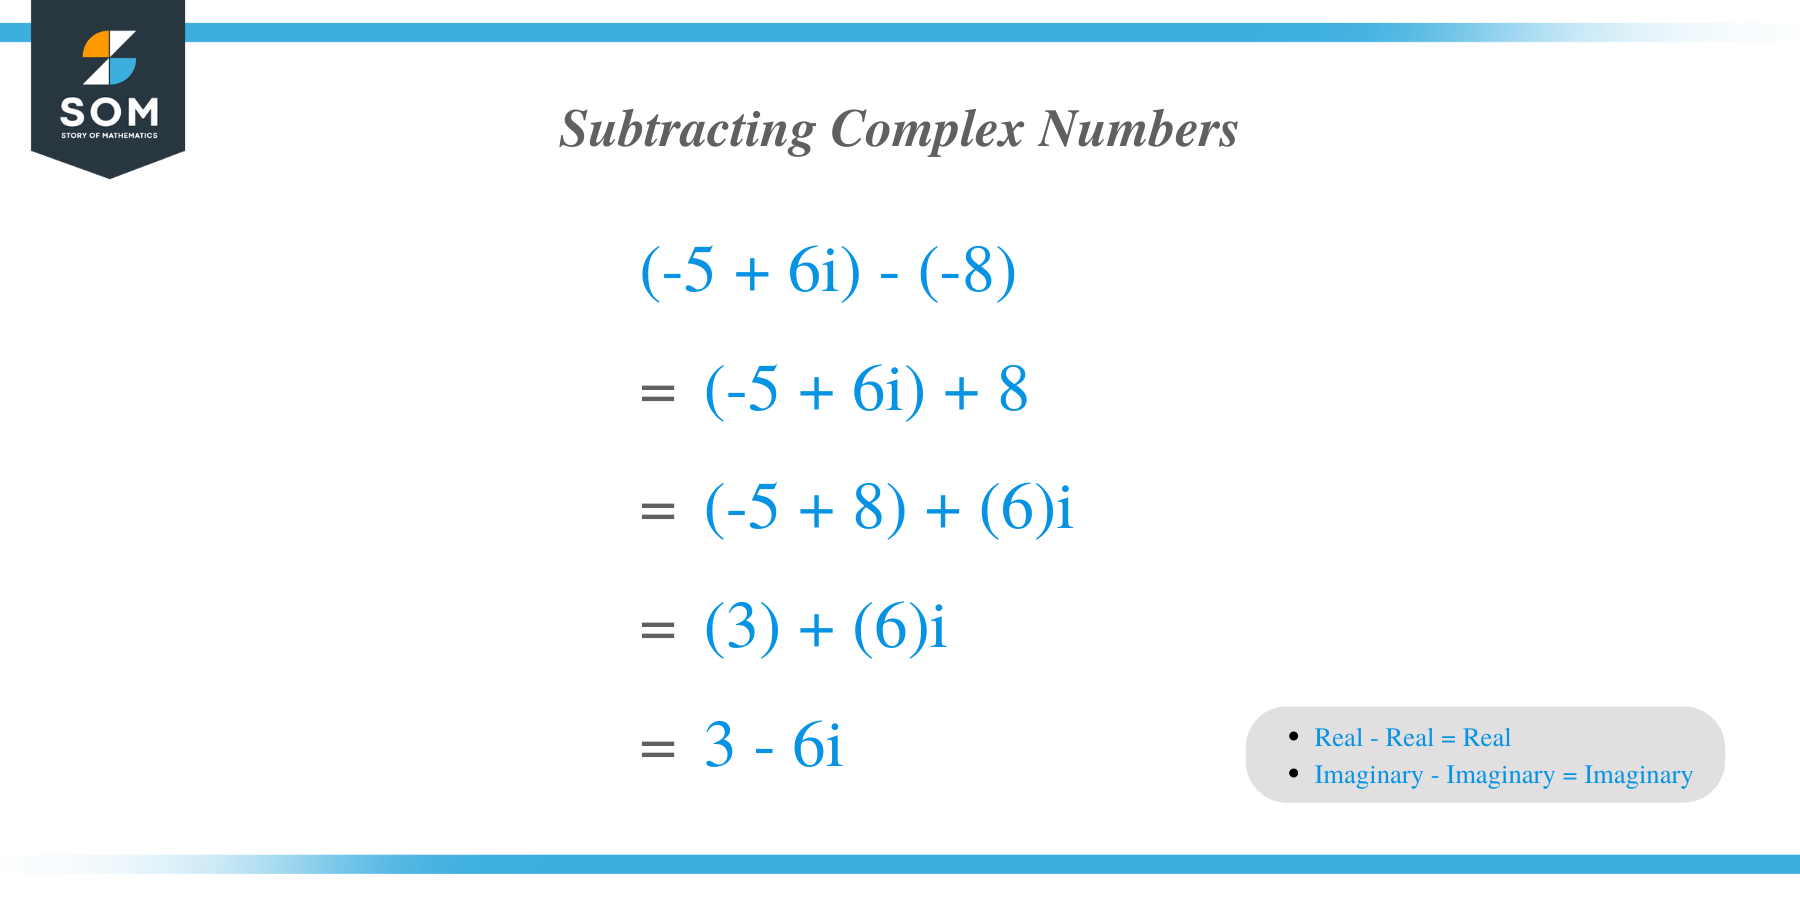 Subtracting complex numbers Example